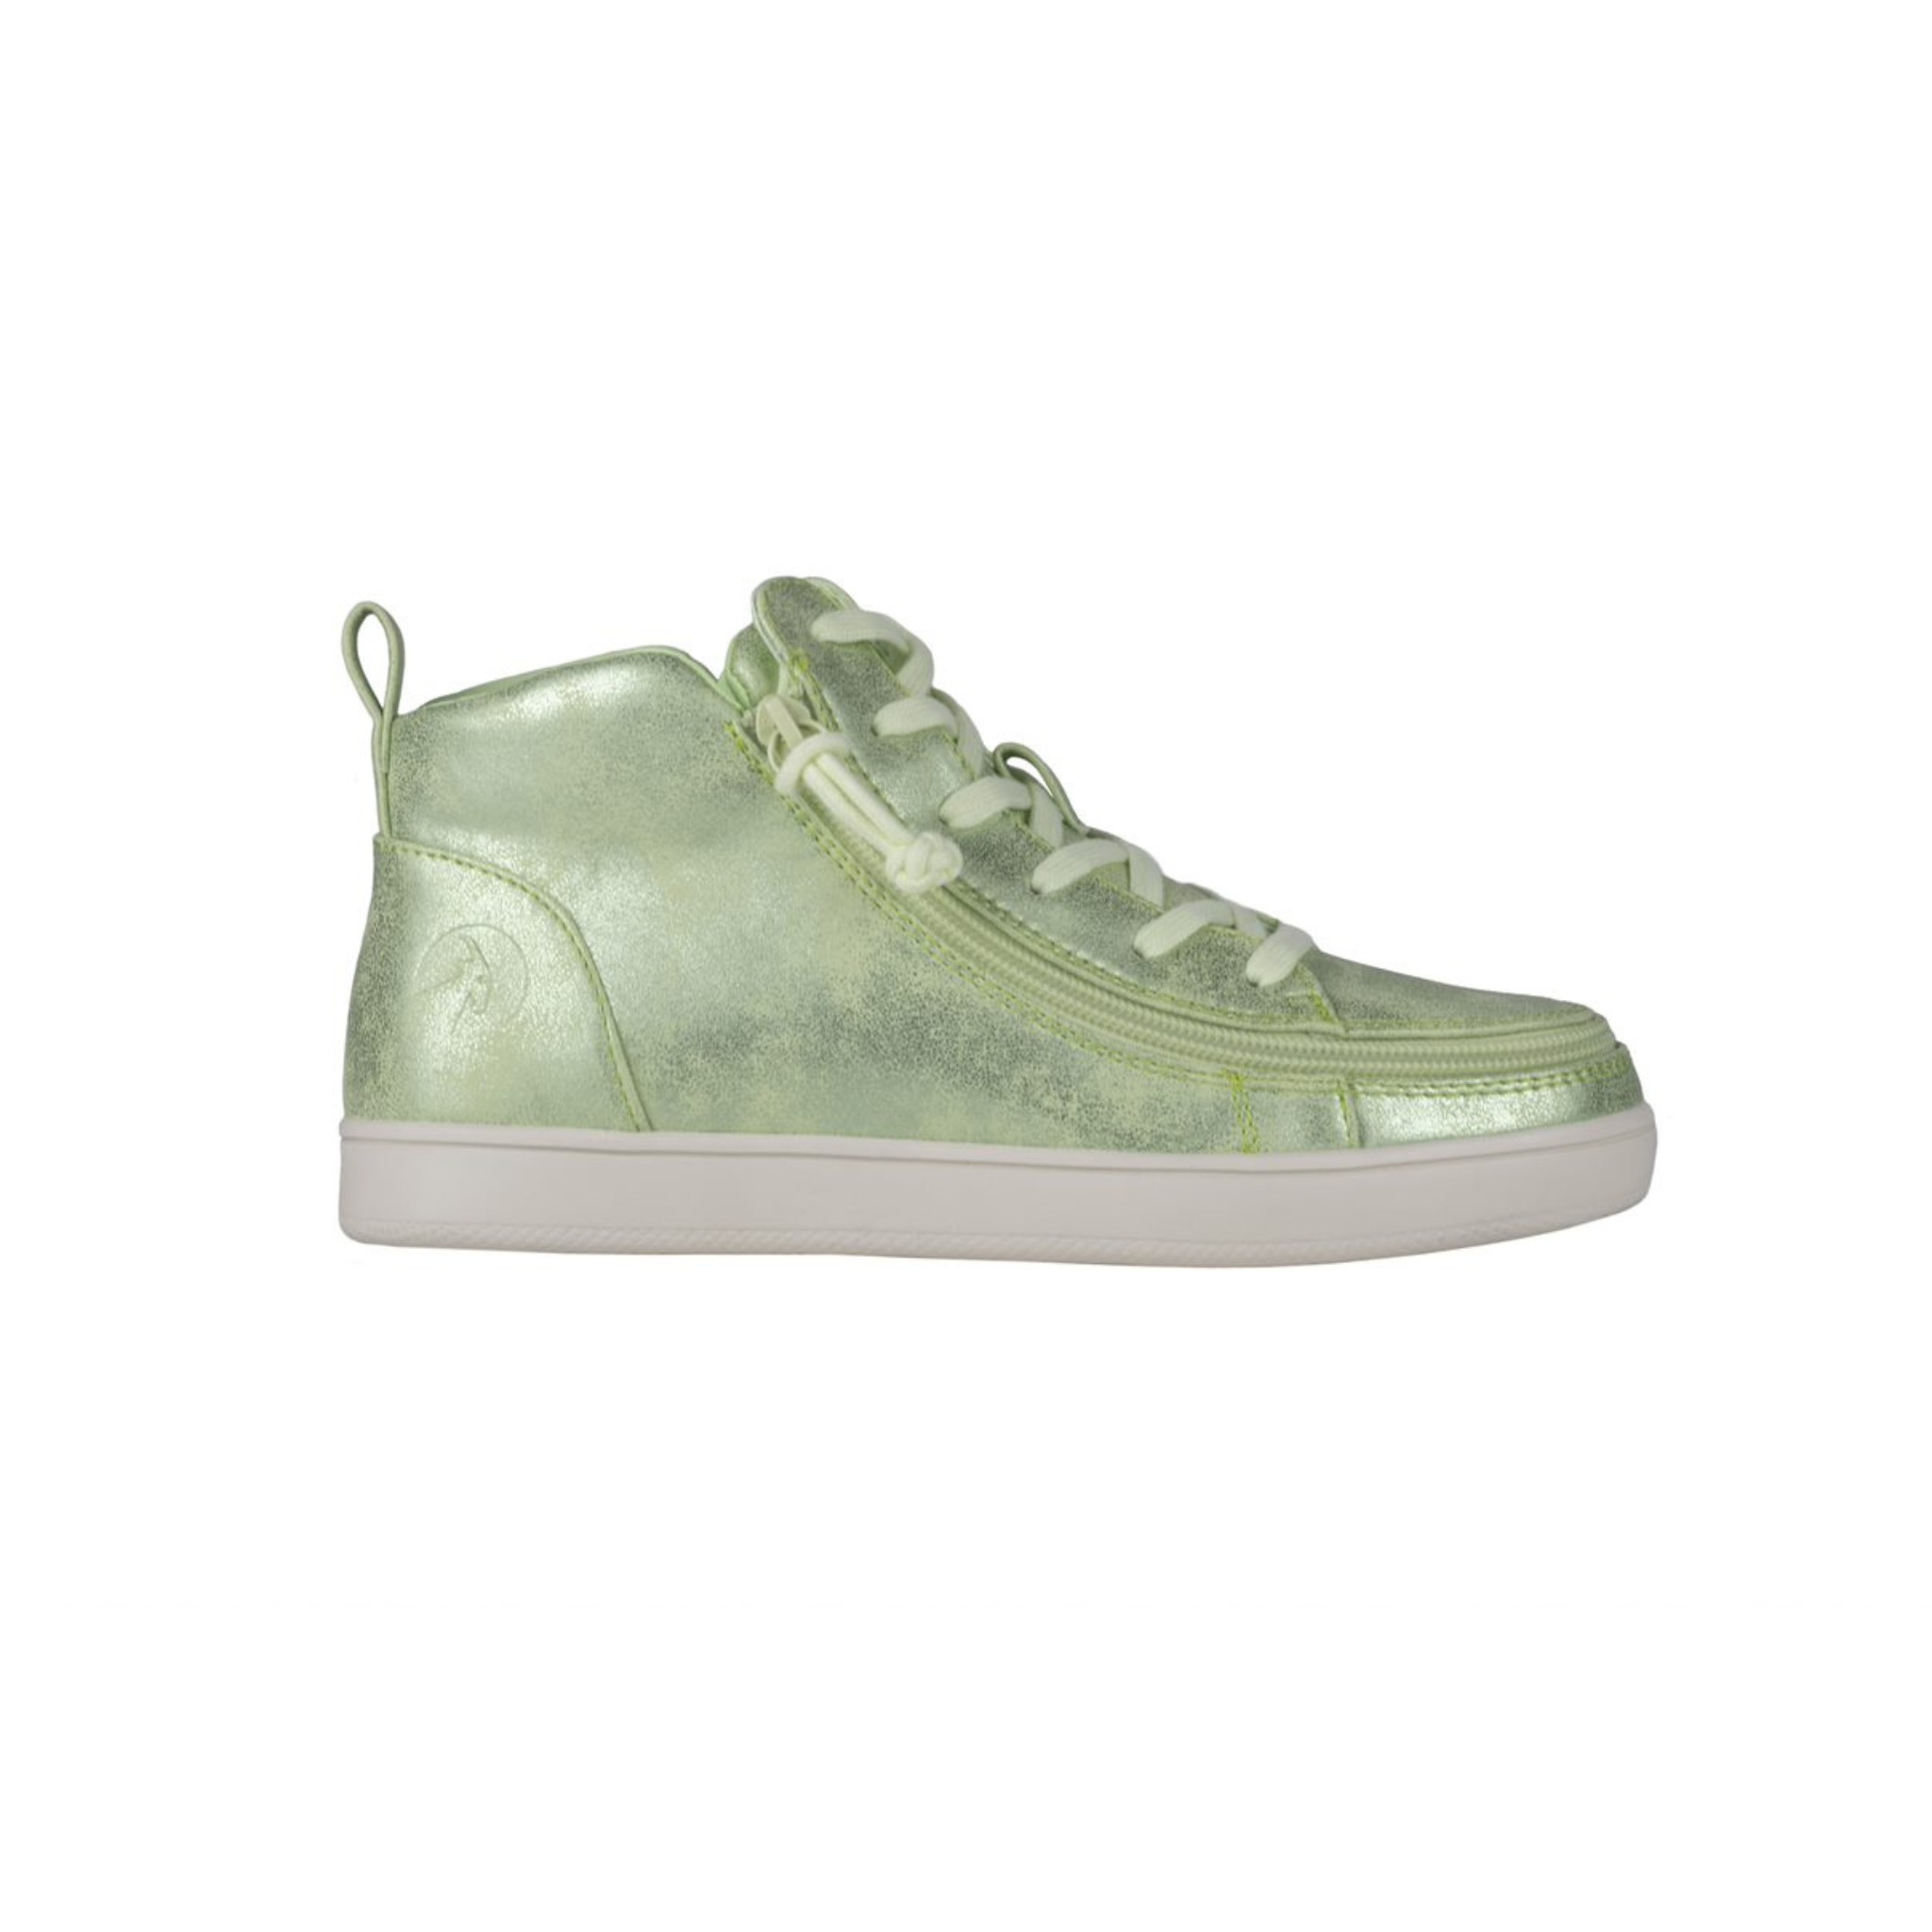 Billy Footwear (Womens) - Mid Top Faux Leather Cucumber Green Shoes